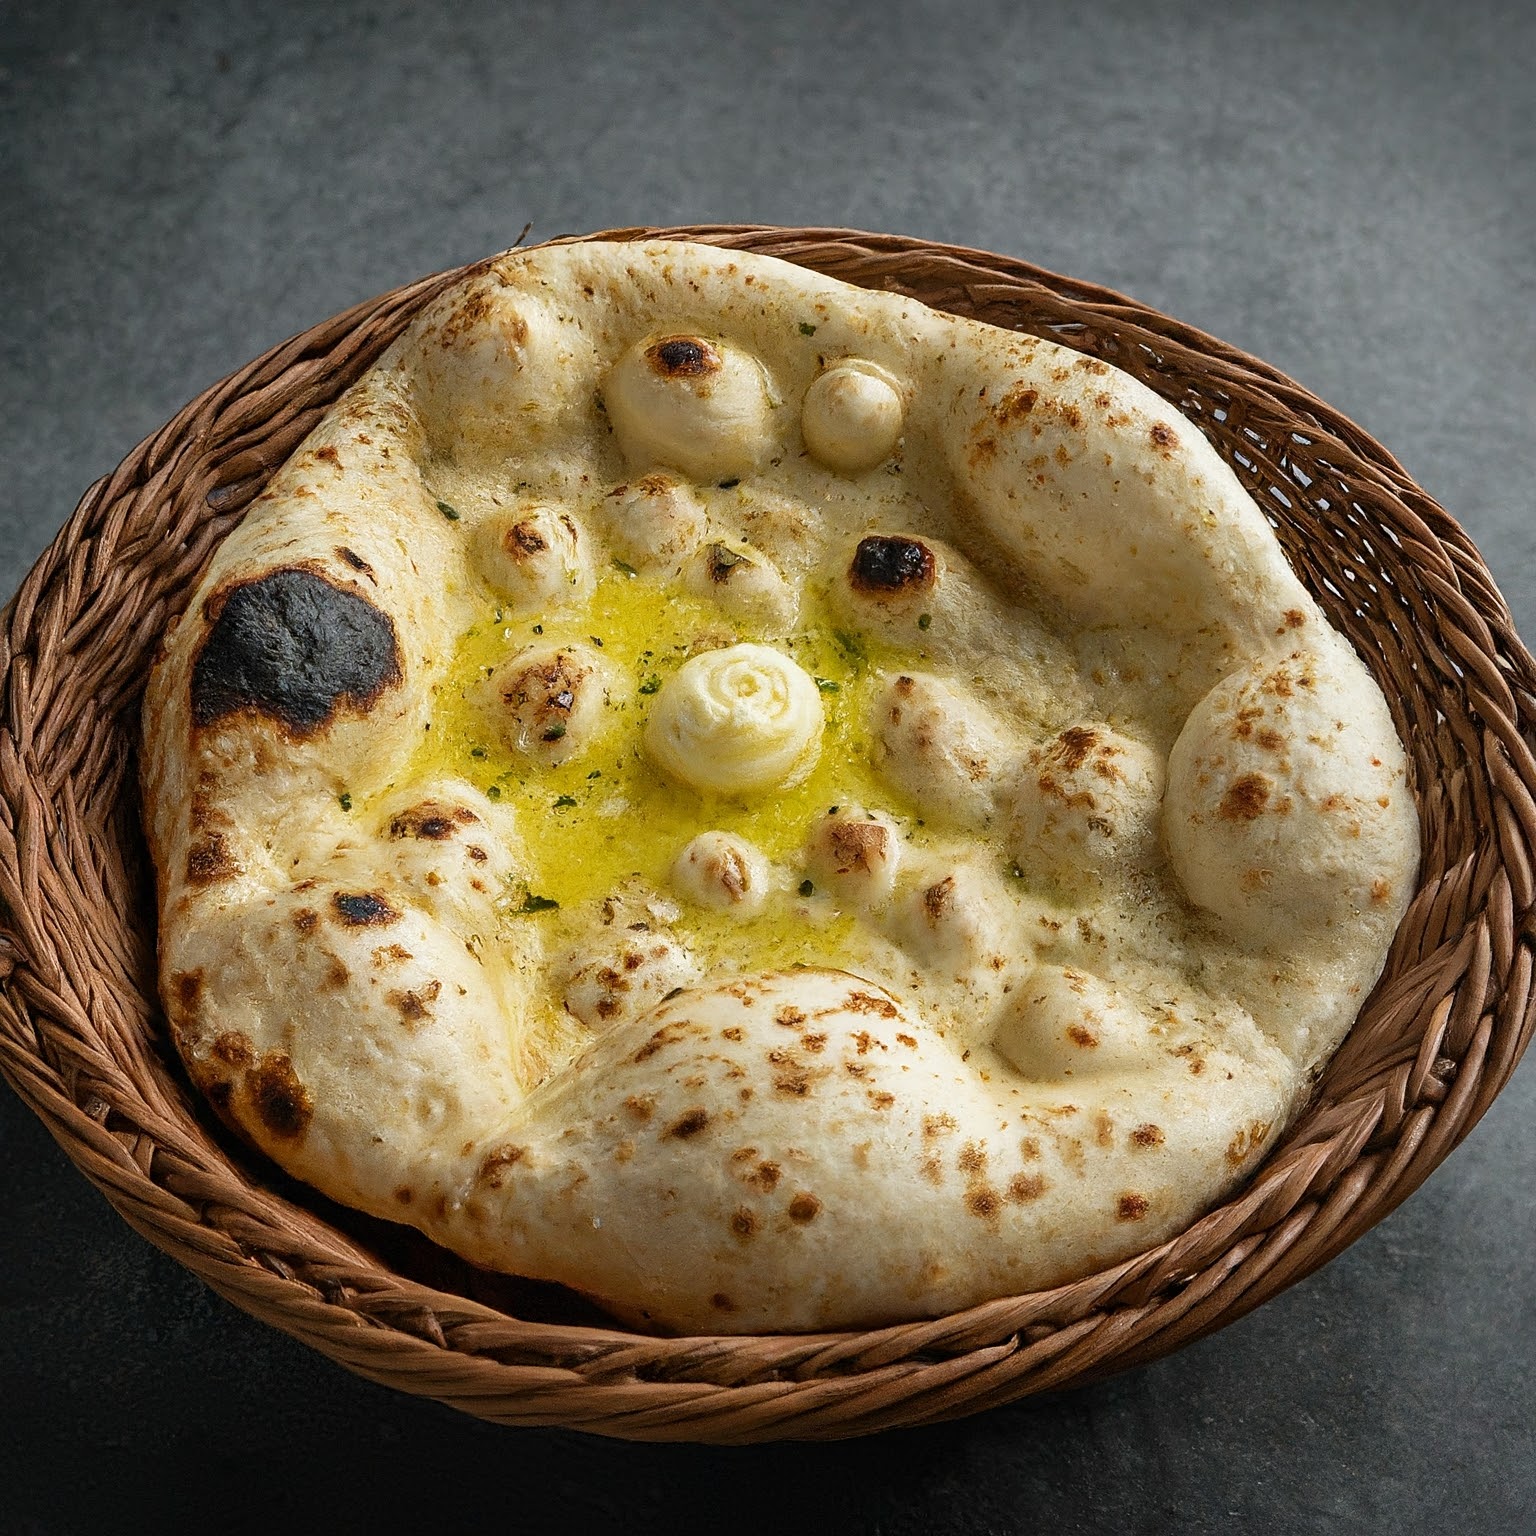 A delicious, fluffy naan bread perfect for scooping up curry or enjoying on its own.